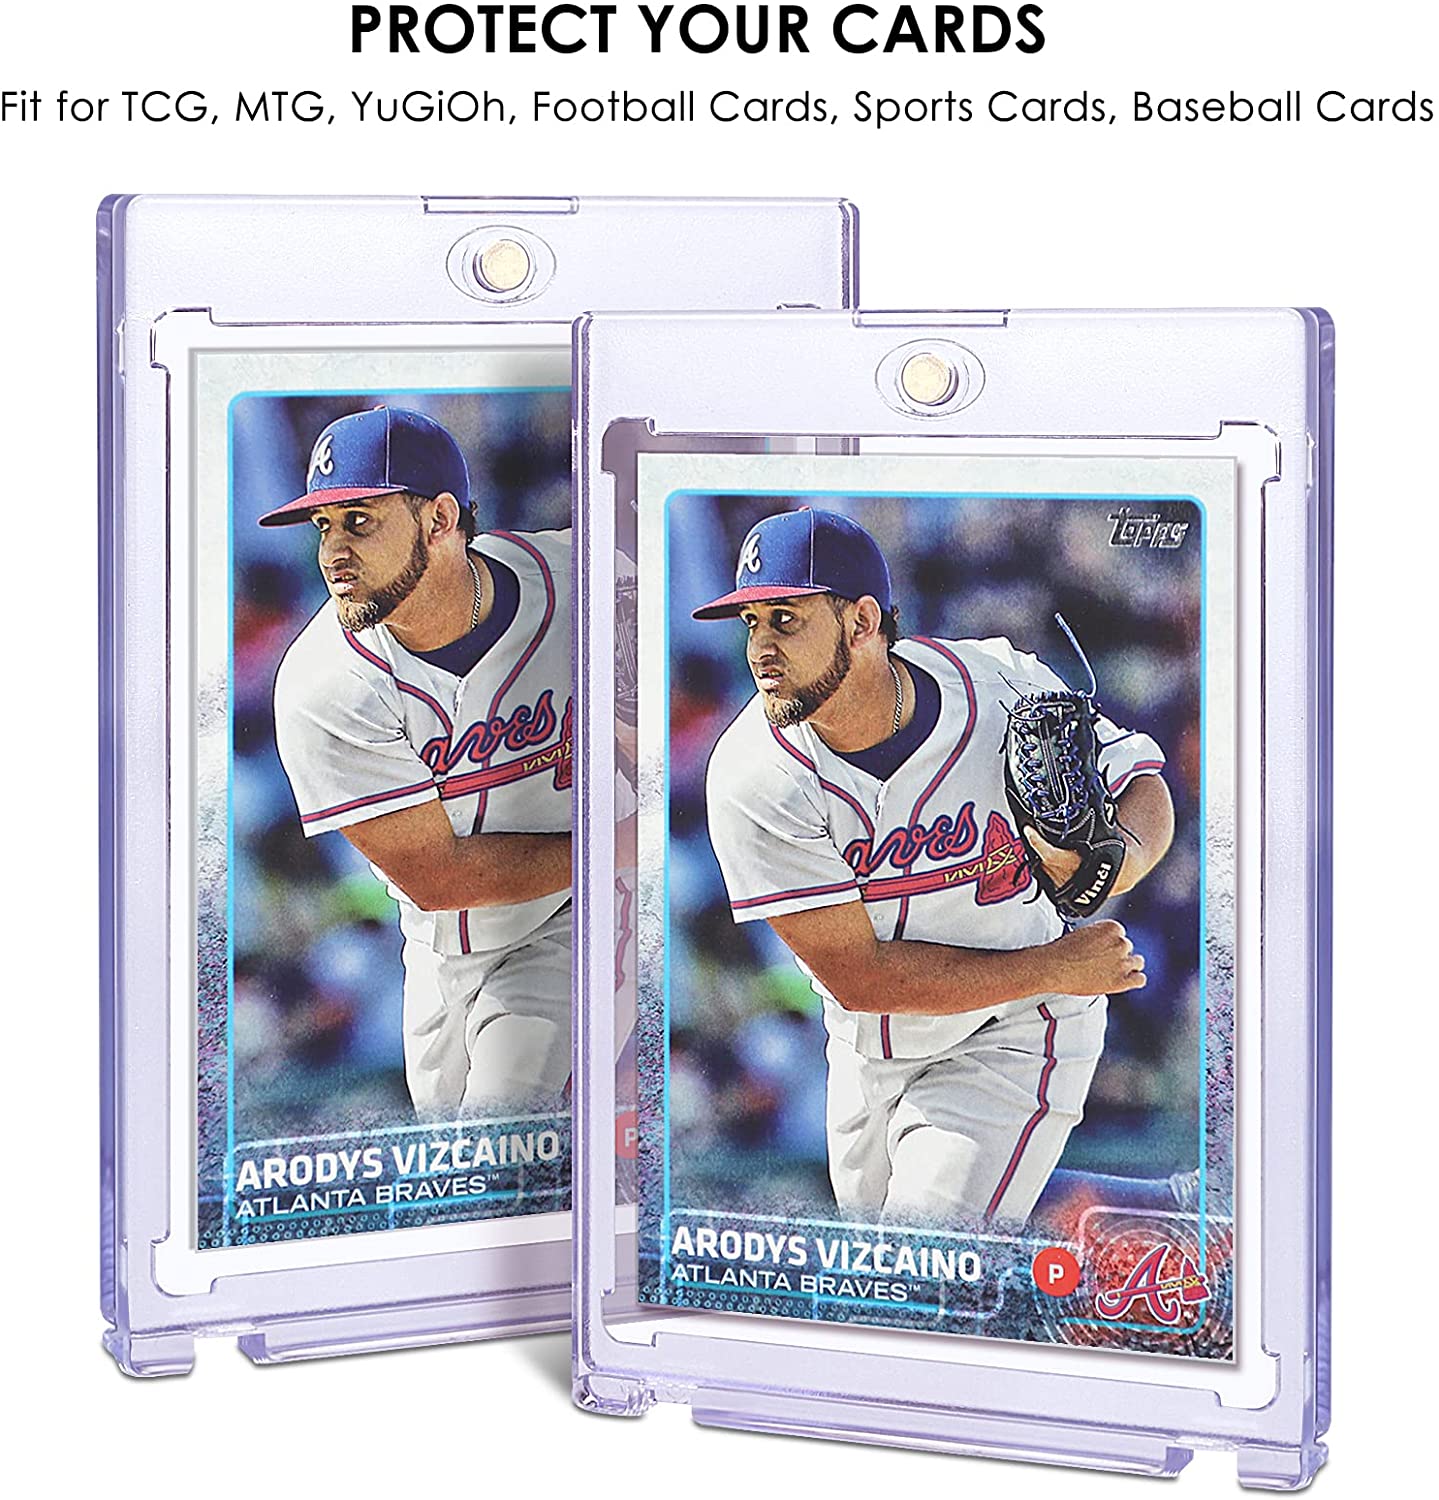 10 Count Magnetic Card Holder 35pt for Trading Cards, Baseball Card Protector Case Magnet Top Loaders with UV Protection Acrylic Screw Down Fit for TCG, MTG, Football, Sports Cards